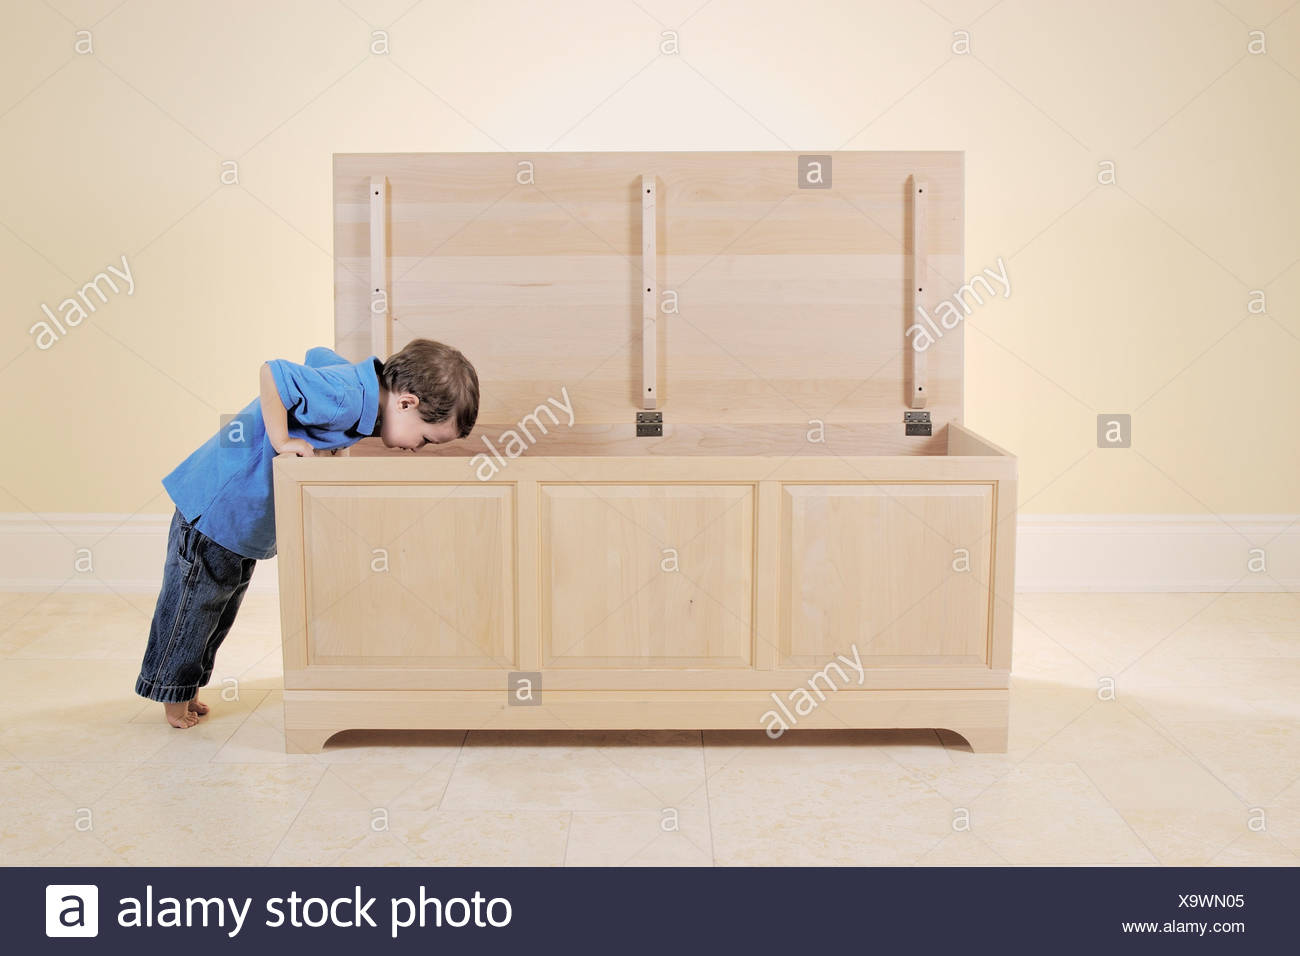 looking for a toy box